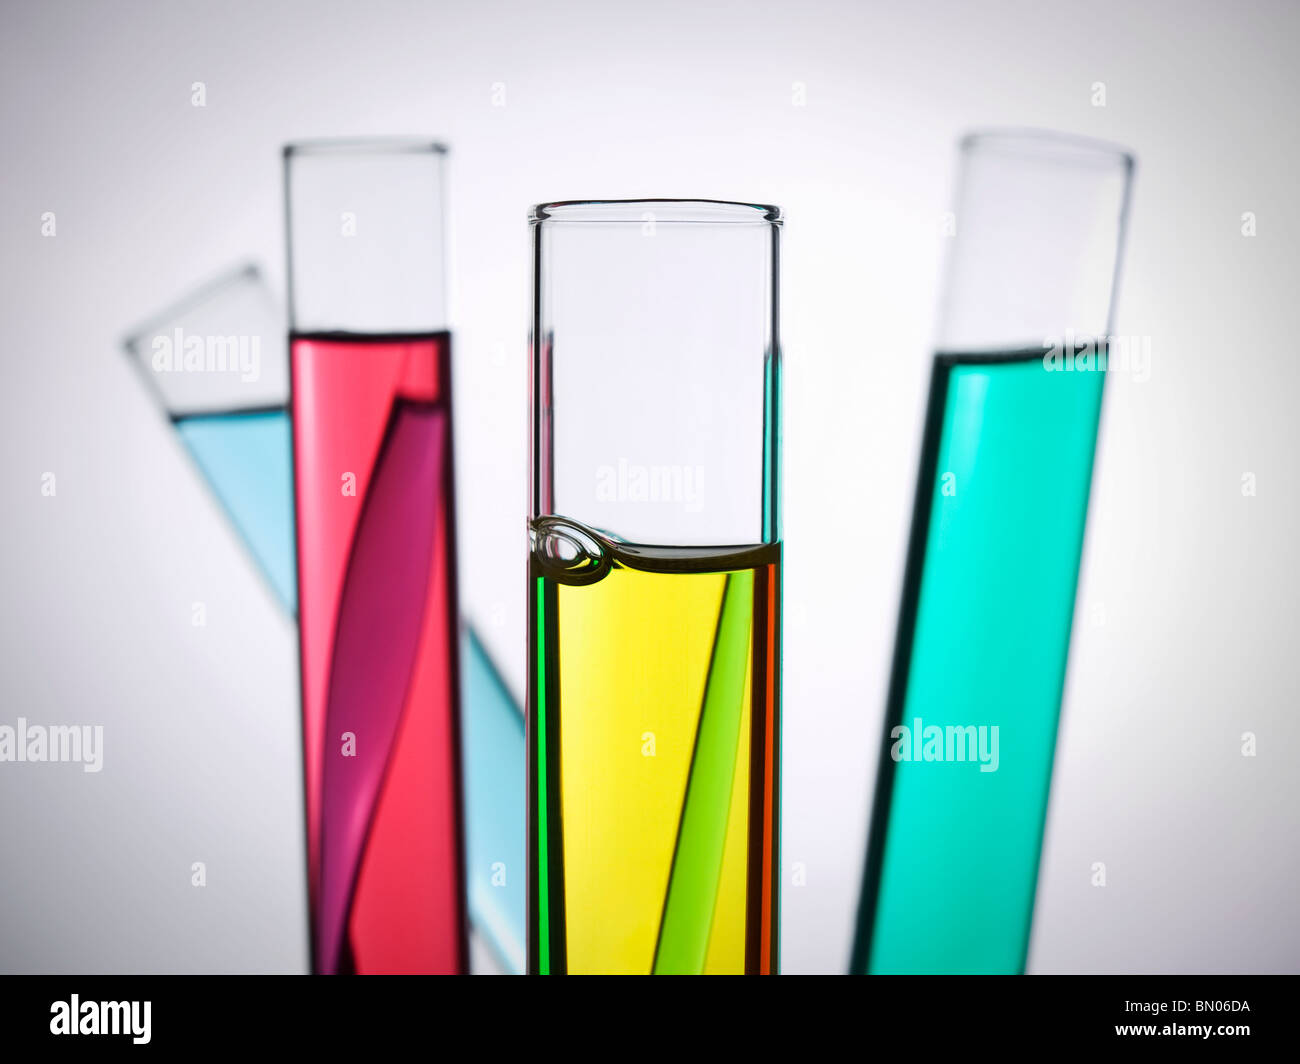 Four test tubes filled with colored liquids. Stock Photo